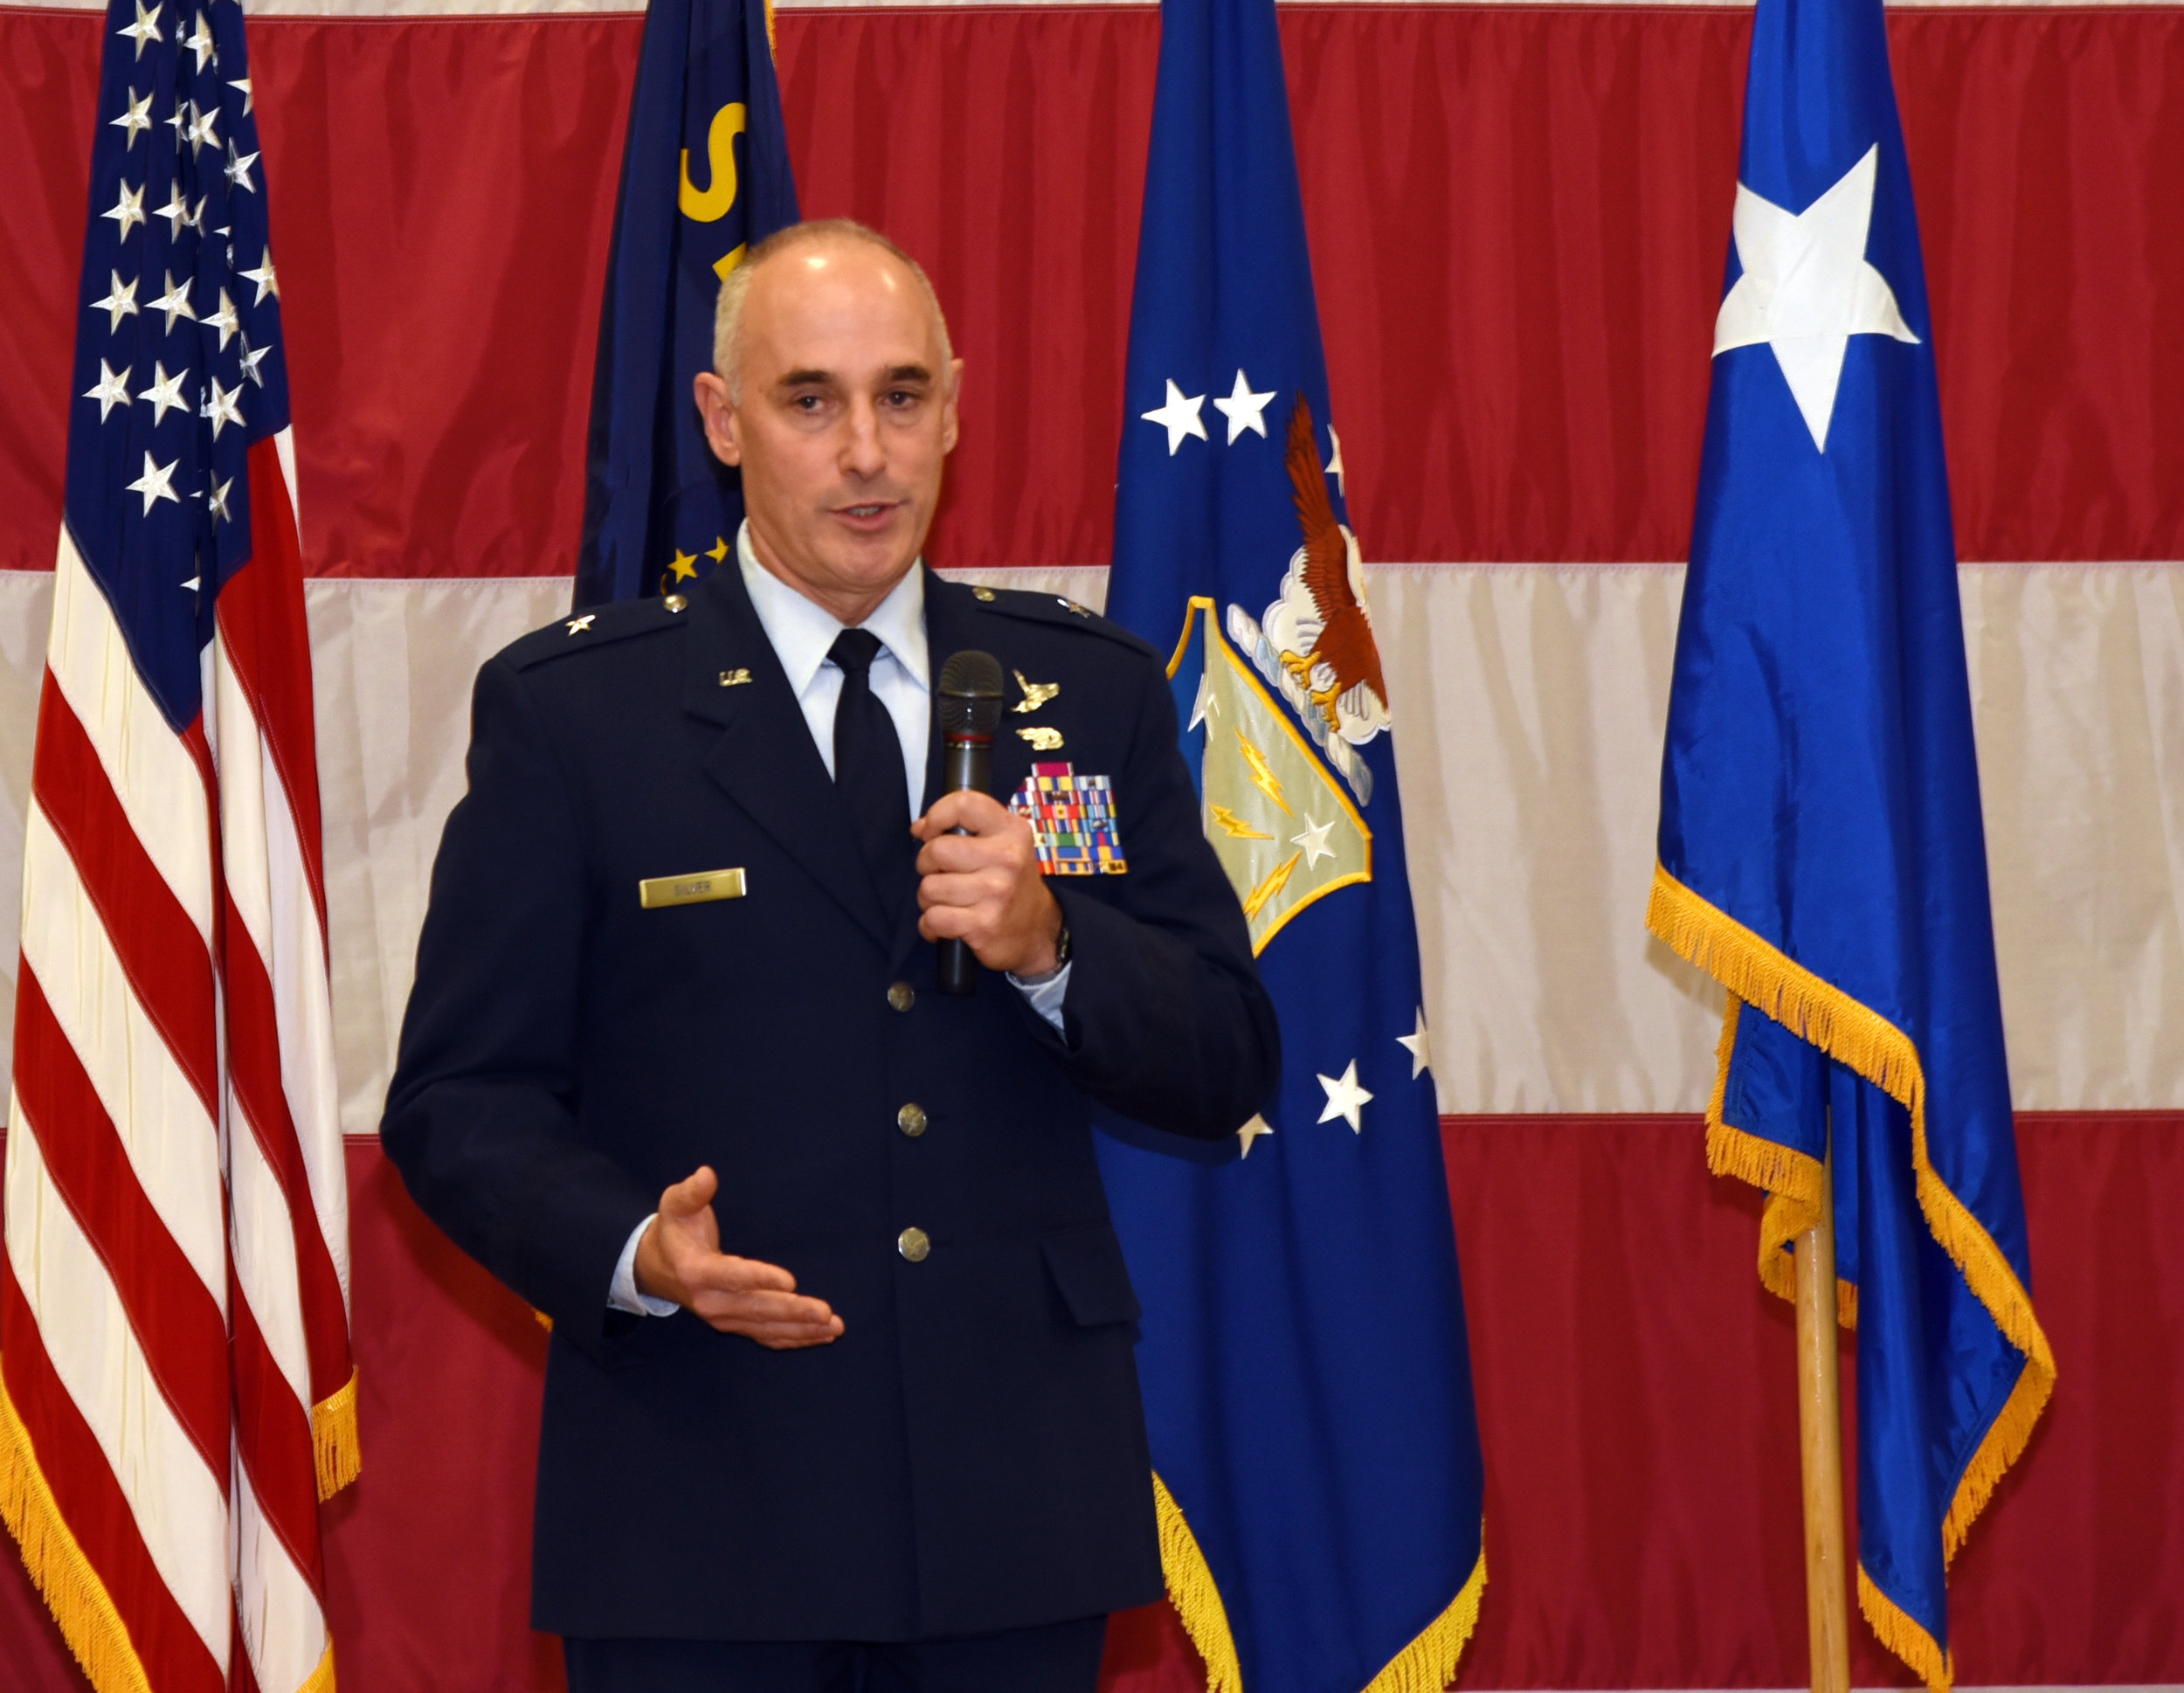  Brig. Gen. Jeffrey M. Silver, outgoing commander, Oregon Air National Guard, gives his parting remarks during a change of command ceremony at the Anderson Readiness Center in Salem, Oregon, Jan. 6, 2018. (U.S. Air National Guard photo by Tech. Sgt. 